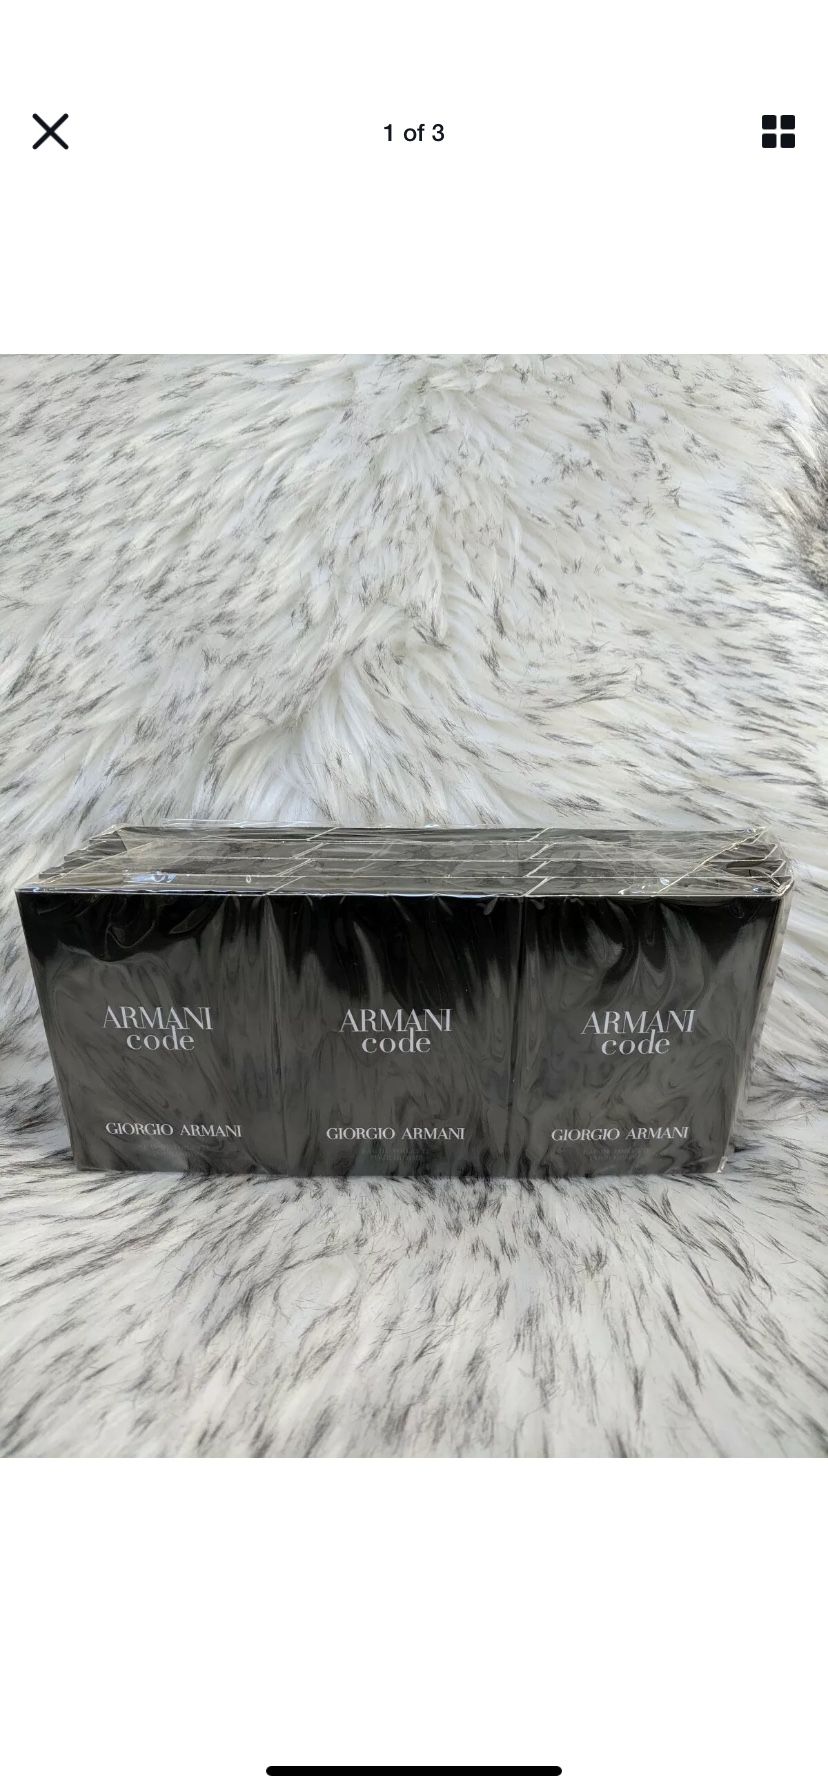 New sealed 12 pack of armani code spray samples vials